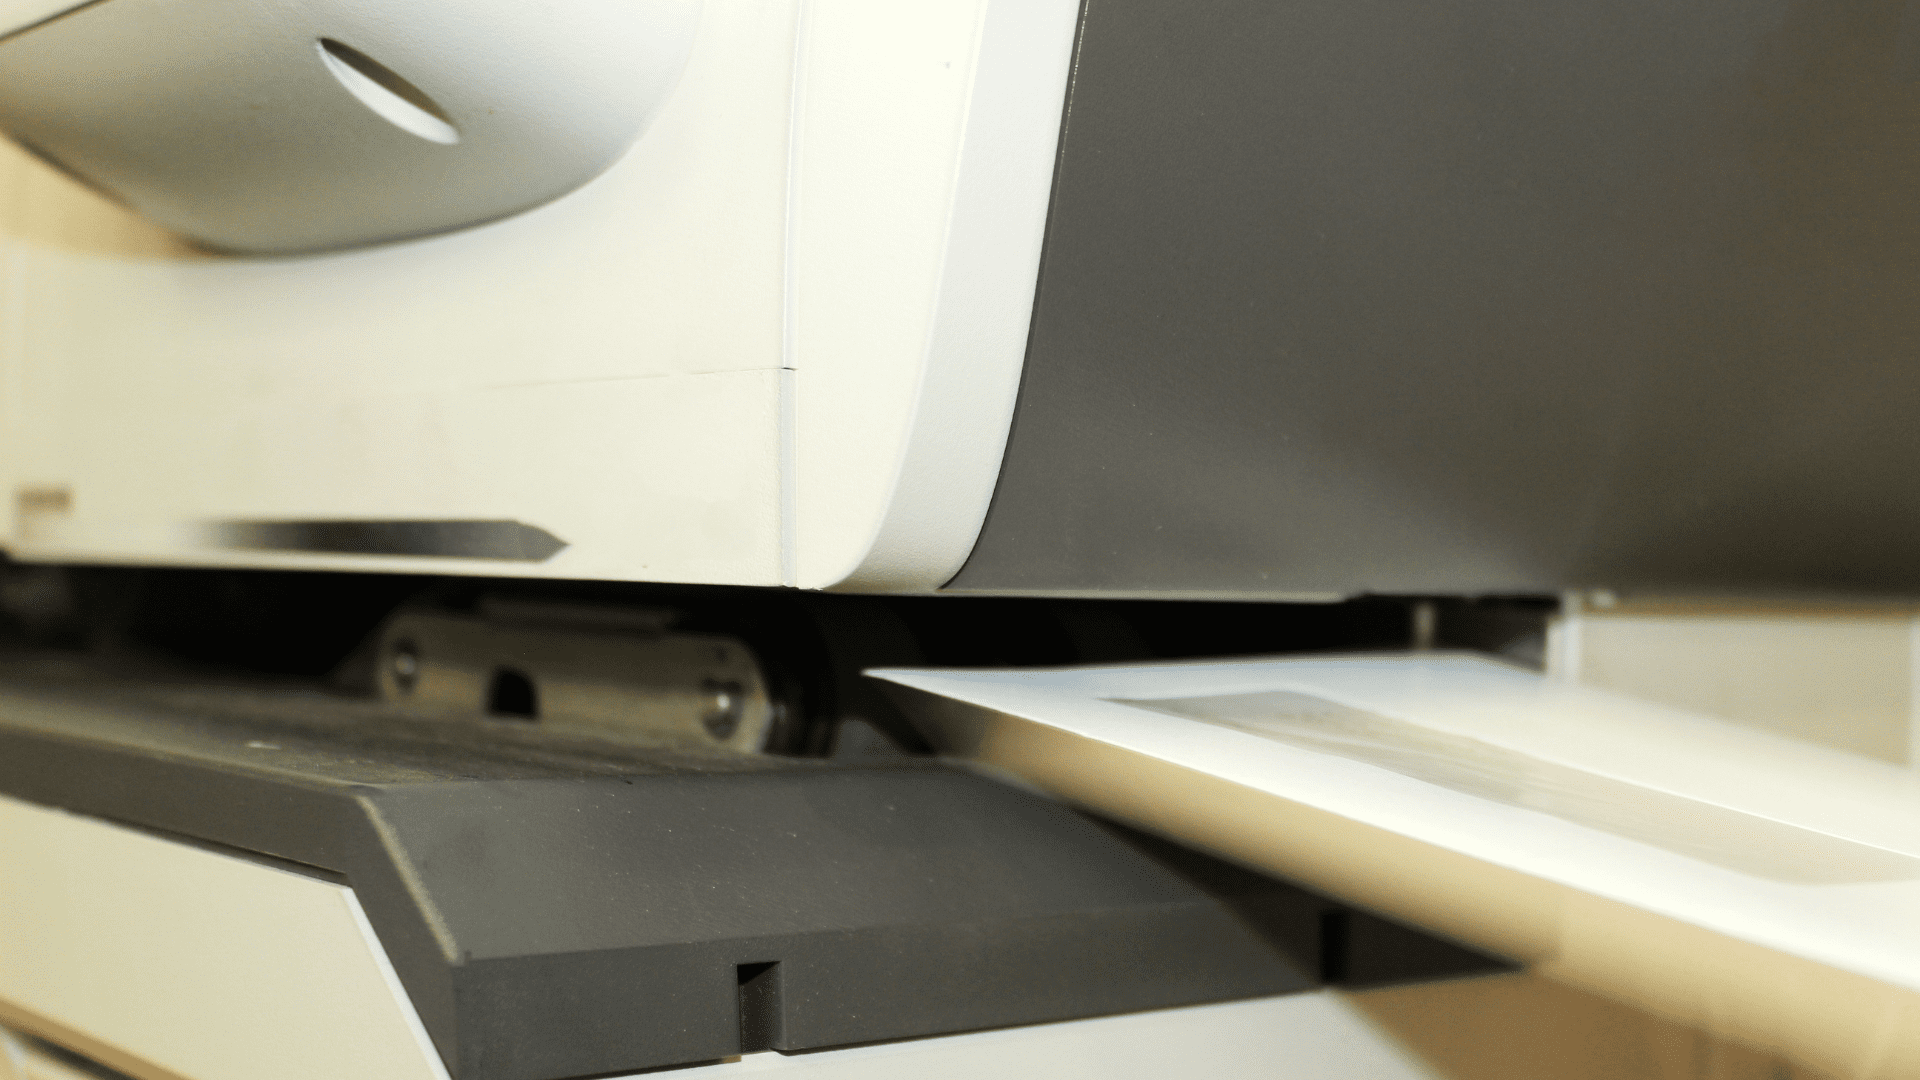 Franking letter machine pushing out paper